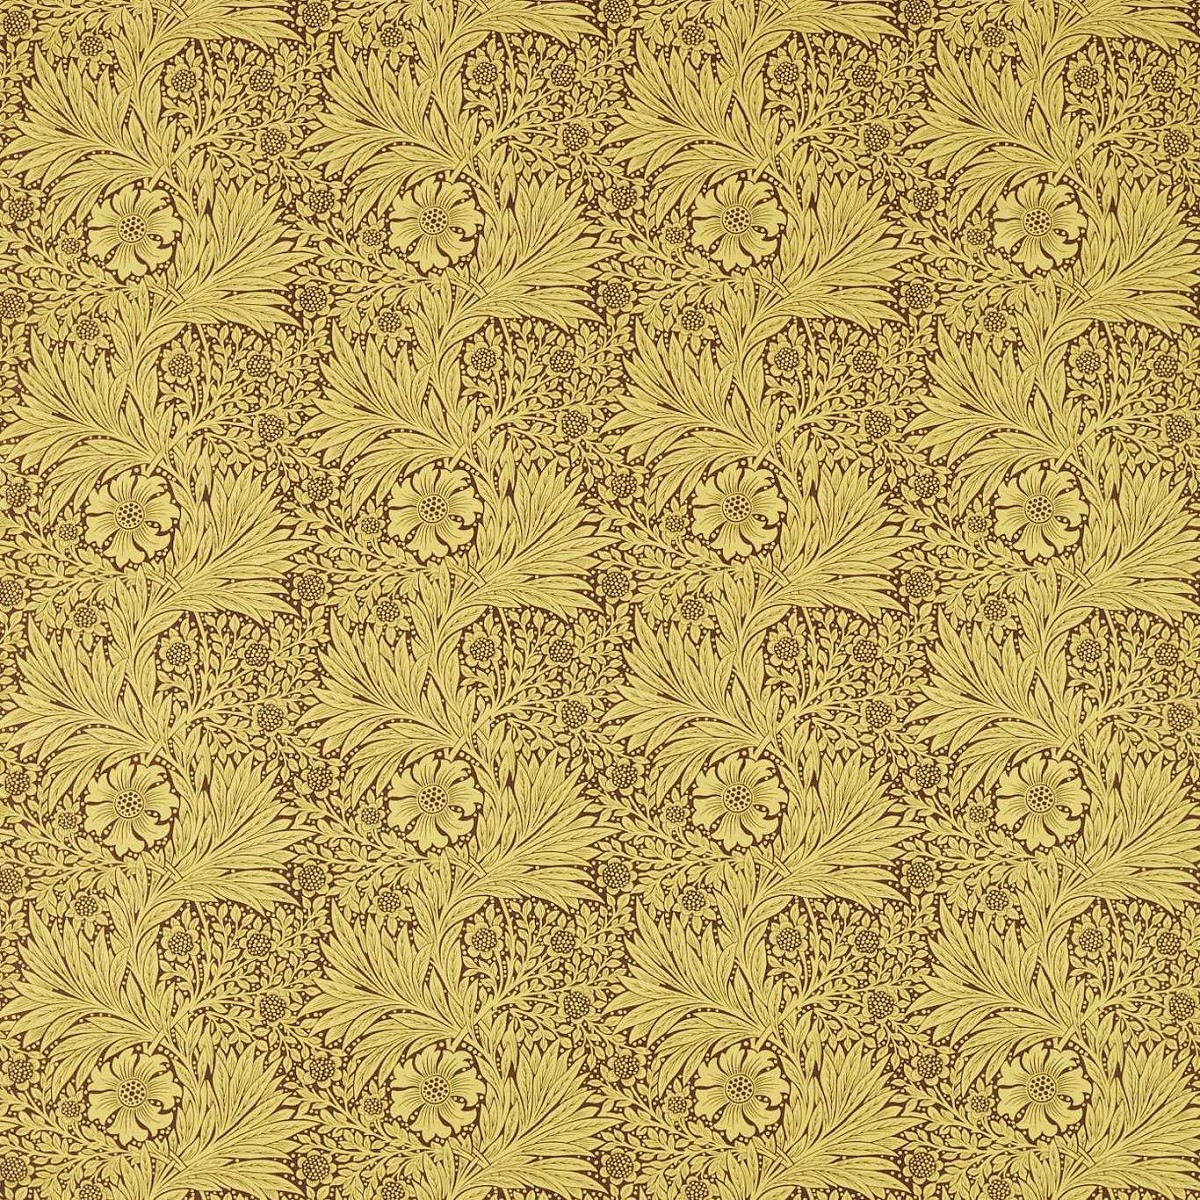 Marigold Summer Yellow/Chocolate Fabric by William Morris & Co.